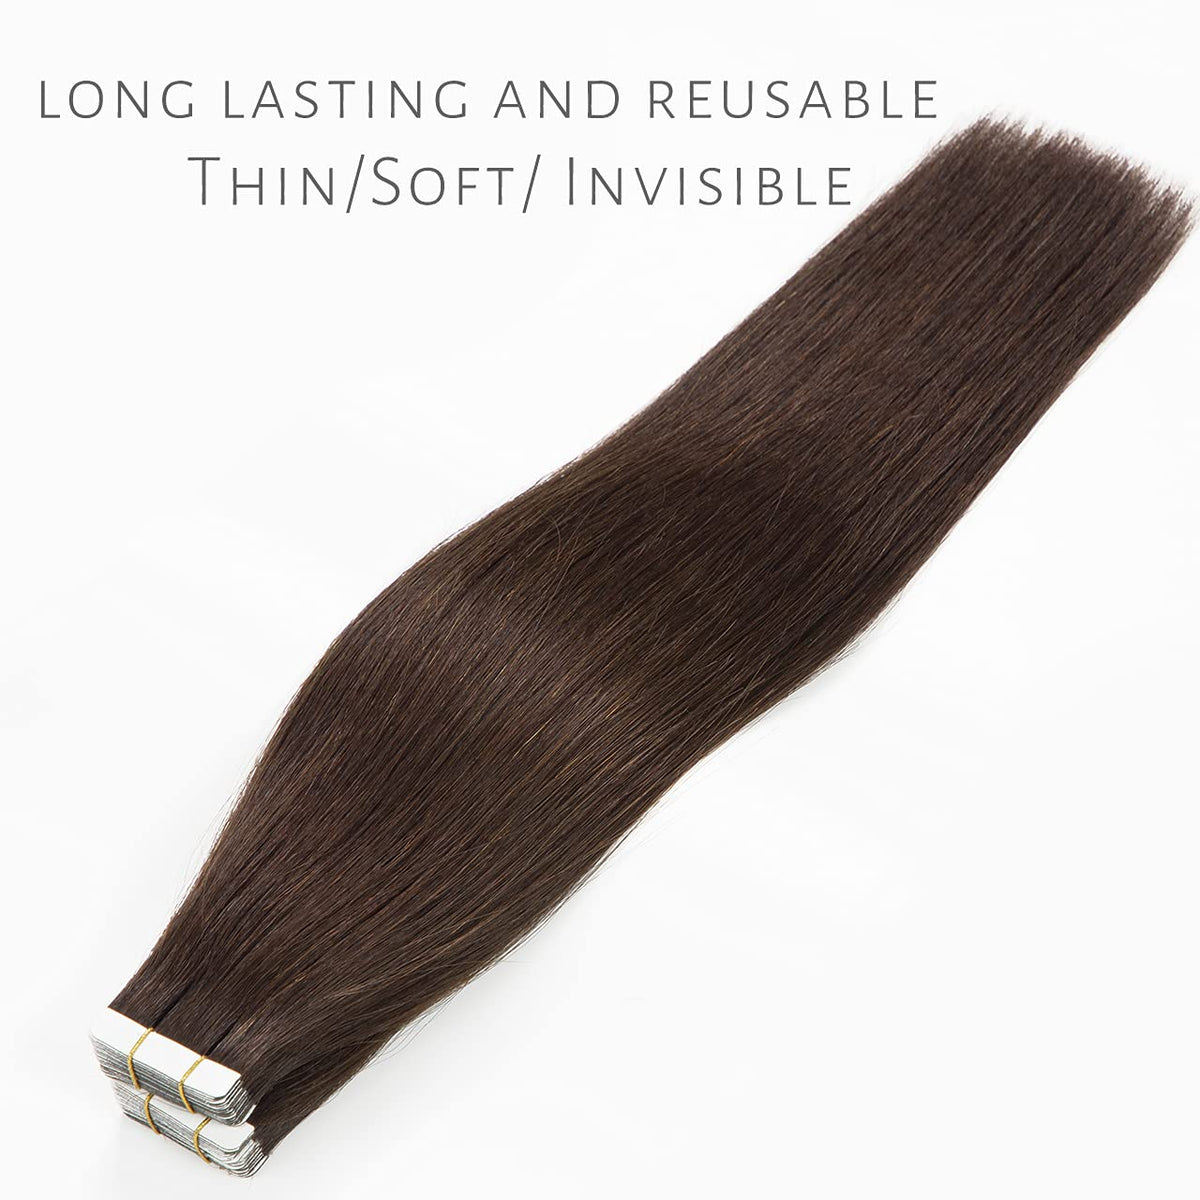 16 inch Human Hair Extensions Tape in Hair Natural Black Balayage PU Skin Weft Color #2 Darkest Brown